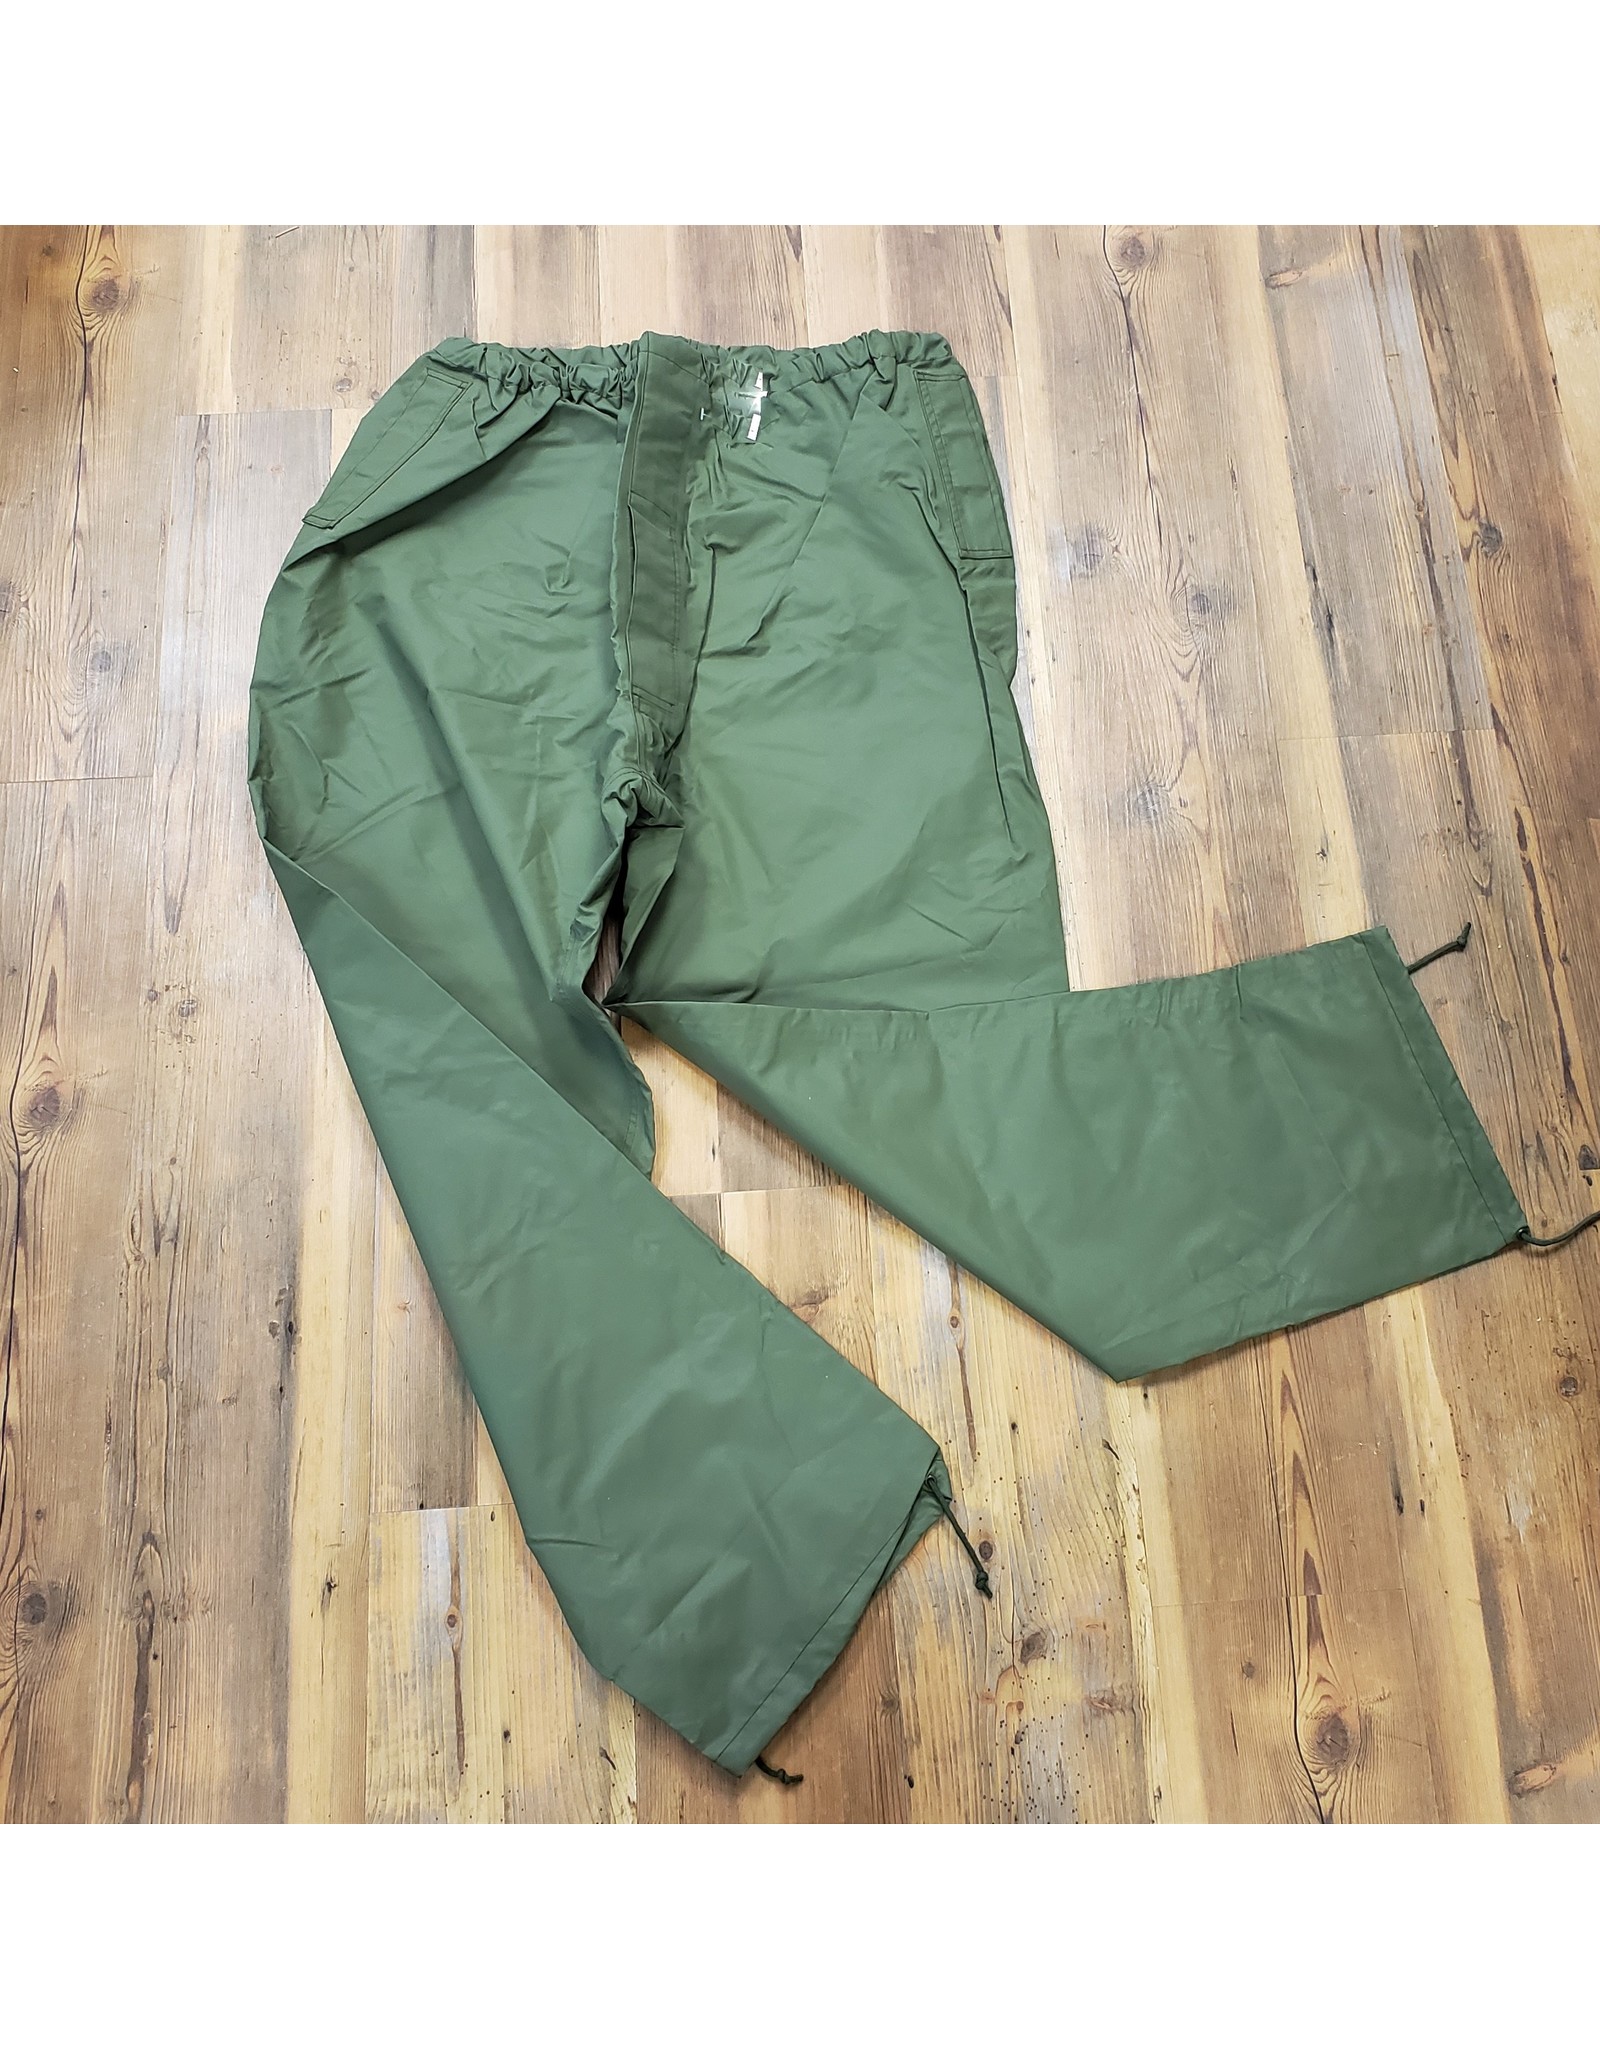 Vintage Military Over-pants - 32-34IN/W